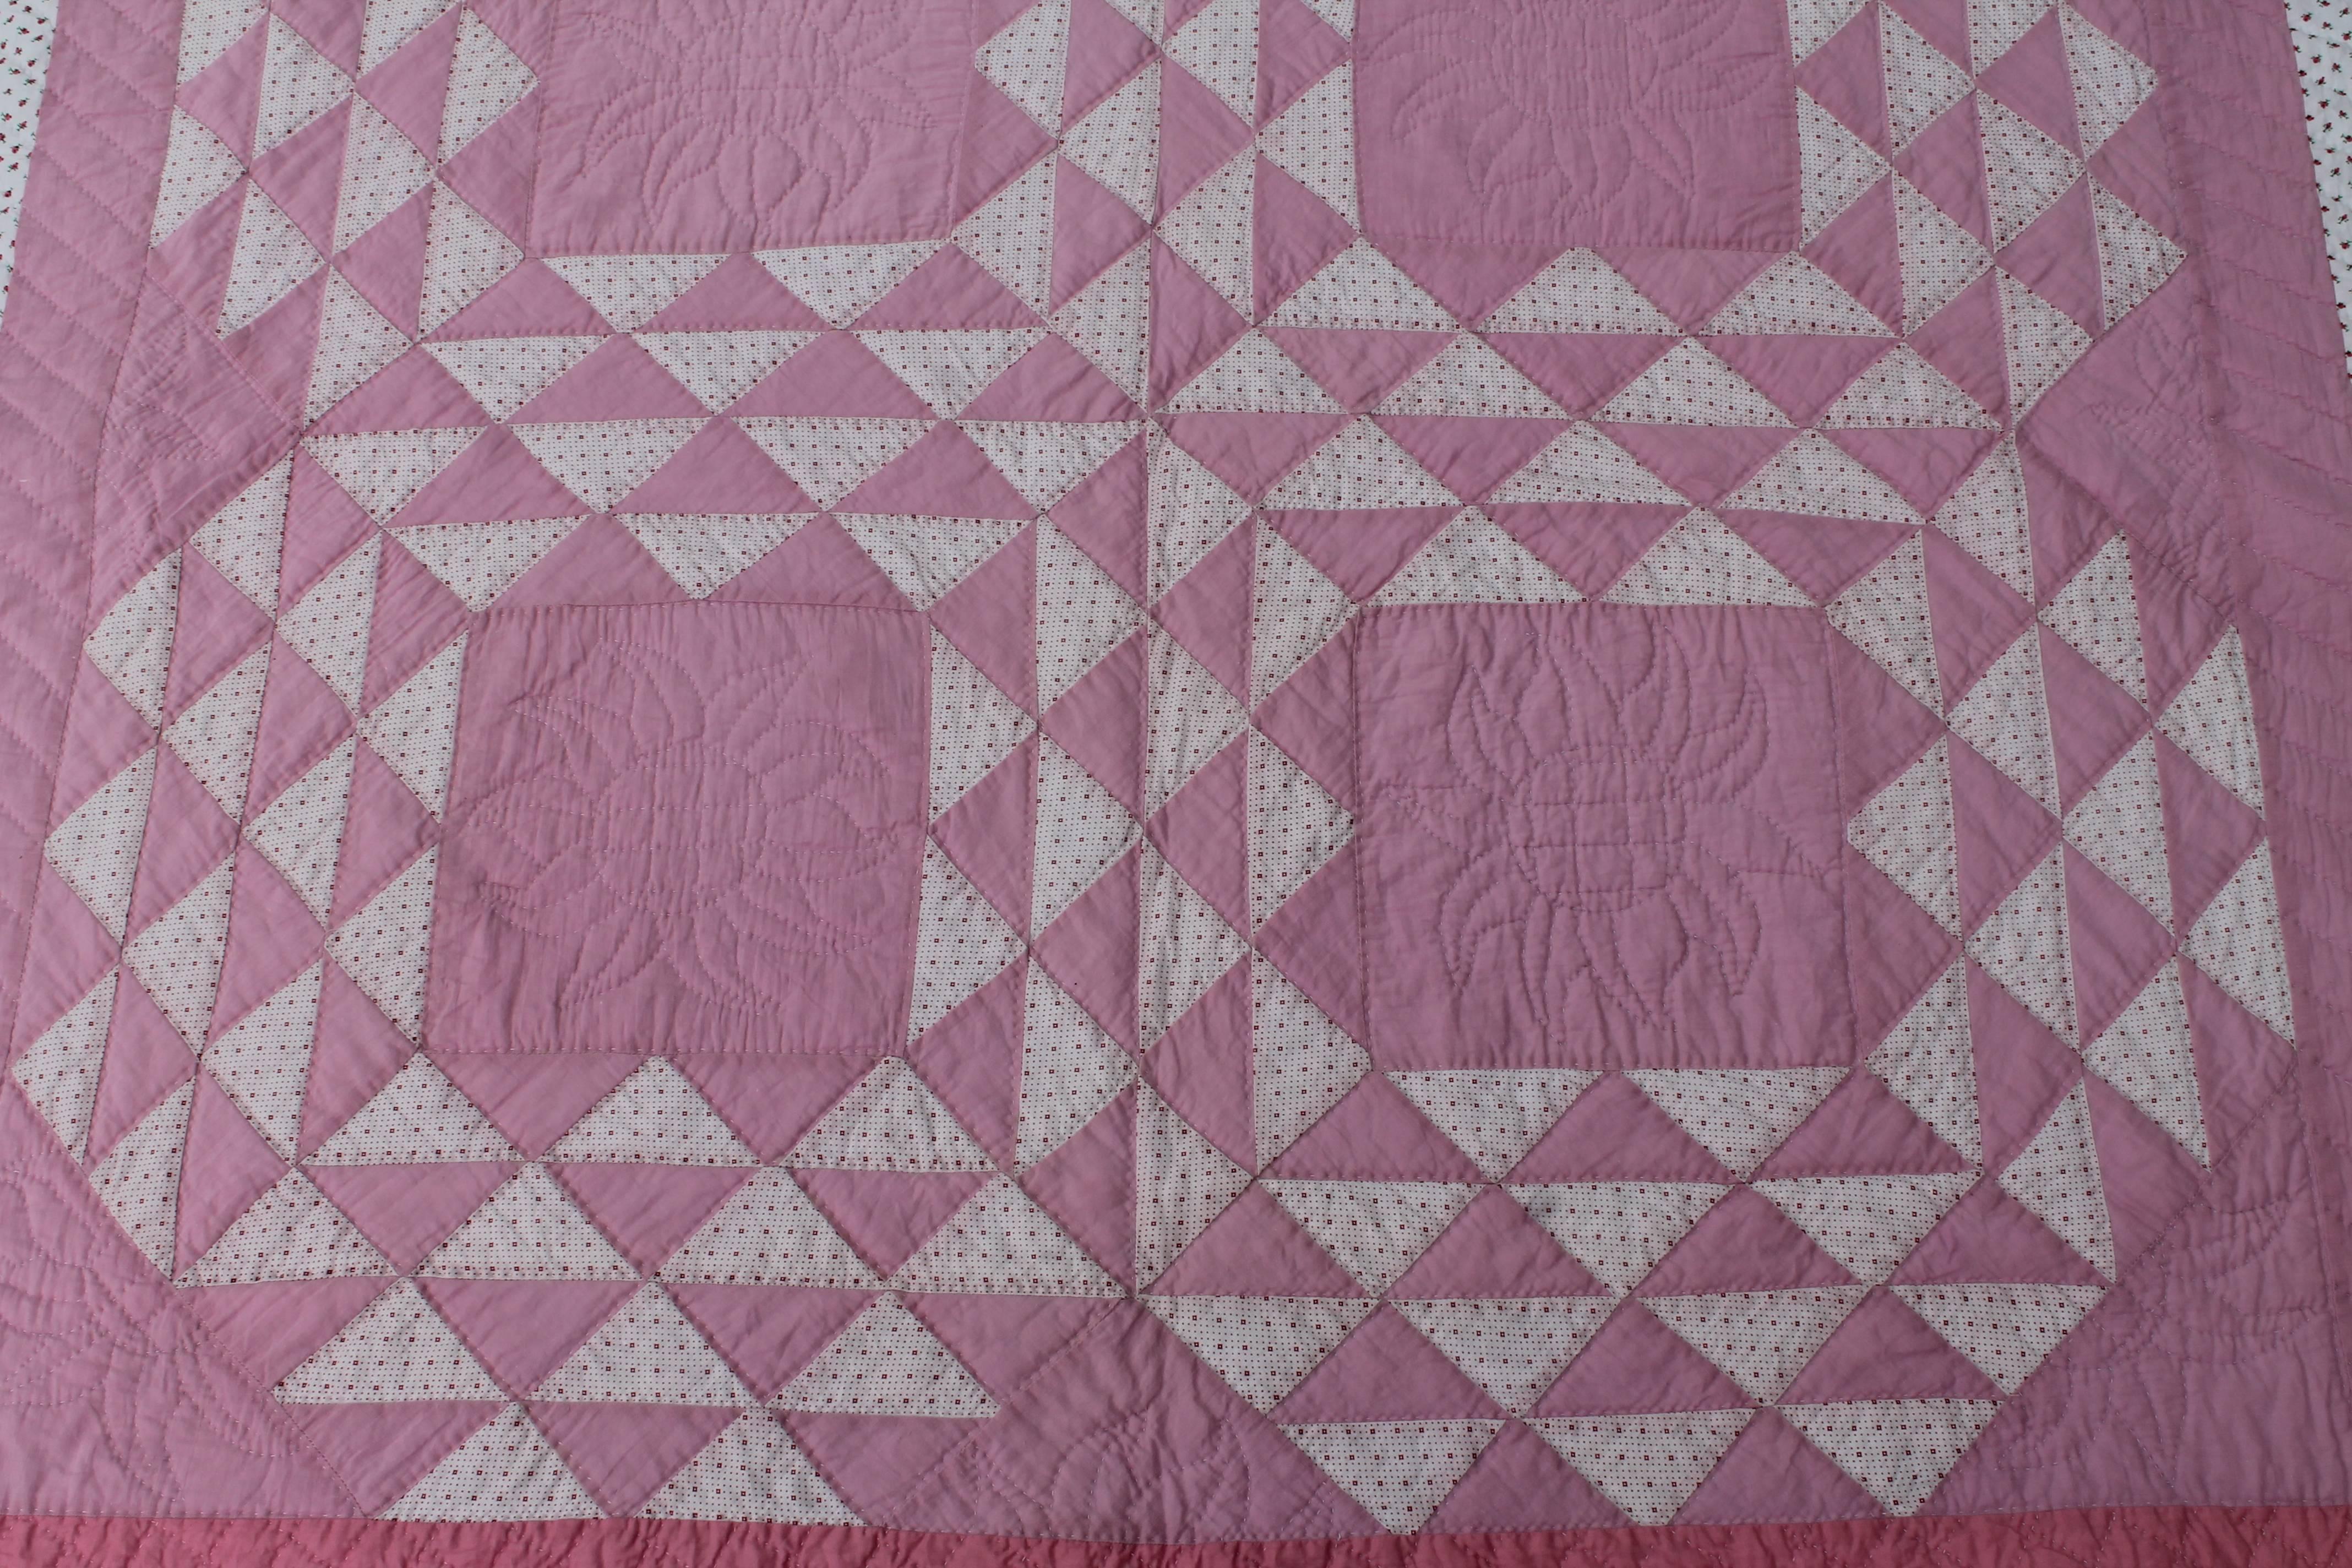 American Pink and White Quilt in Contained Flying Geese Pattern